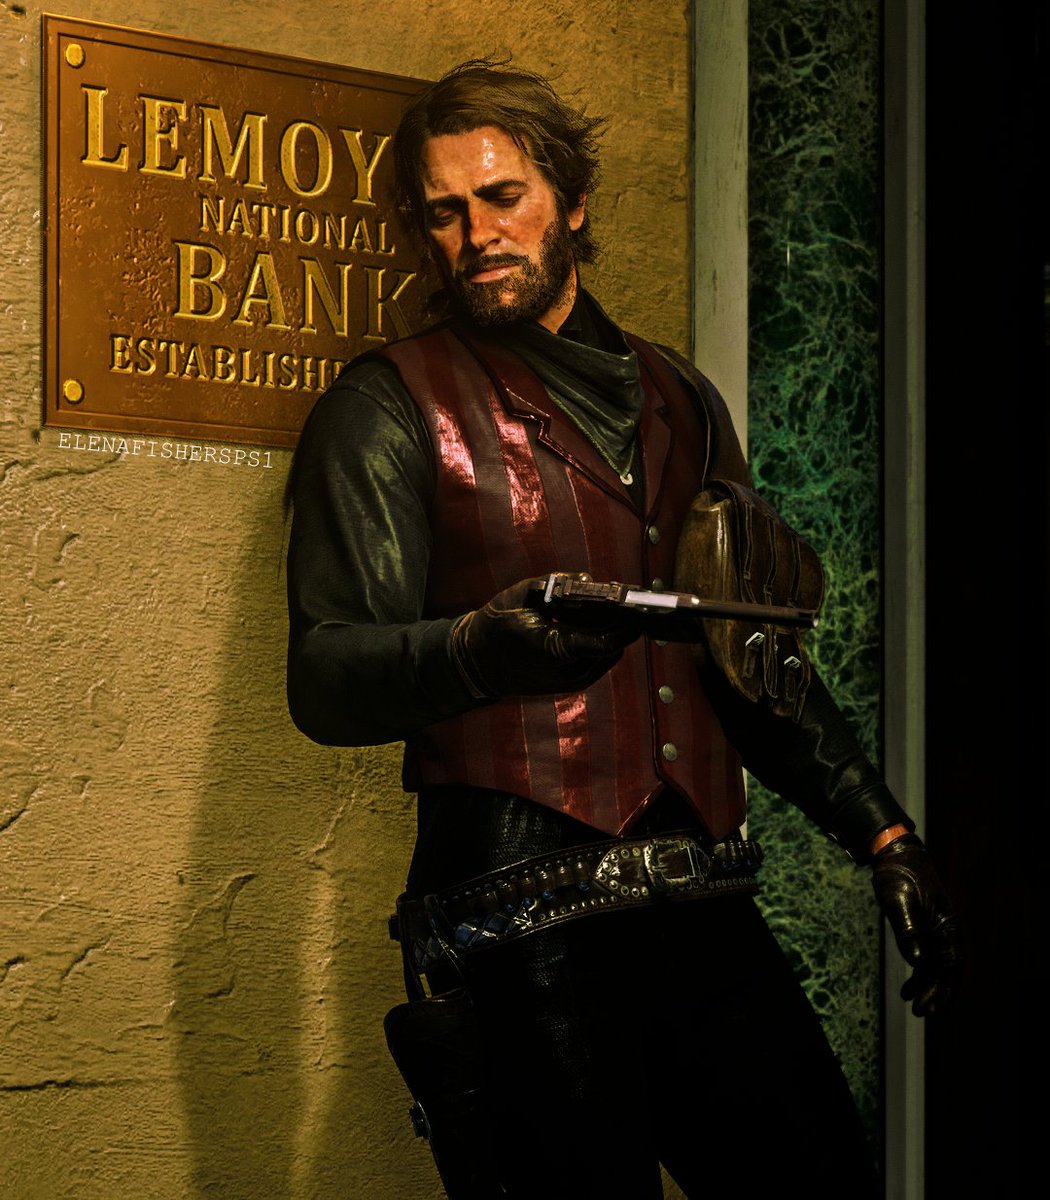 Finally got my game working again. Gonna rob Lemoyne National Bank. I have a good feeling about that place 🙂

#arthurmorgan #rdr2 #redeadredemption2 #rockstargames